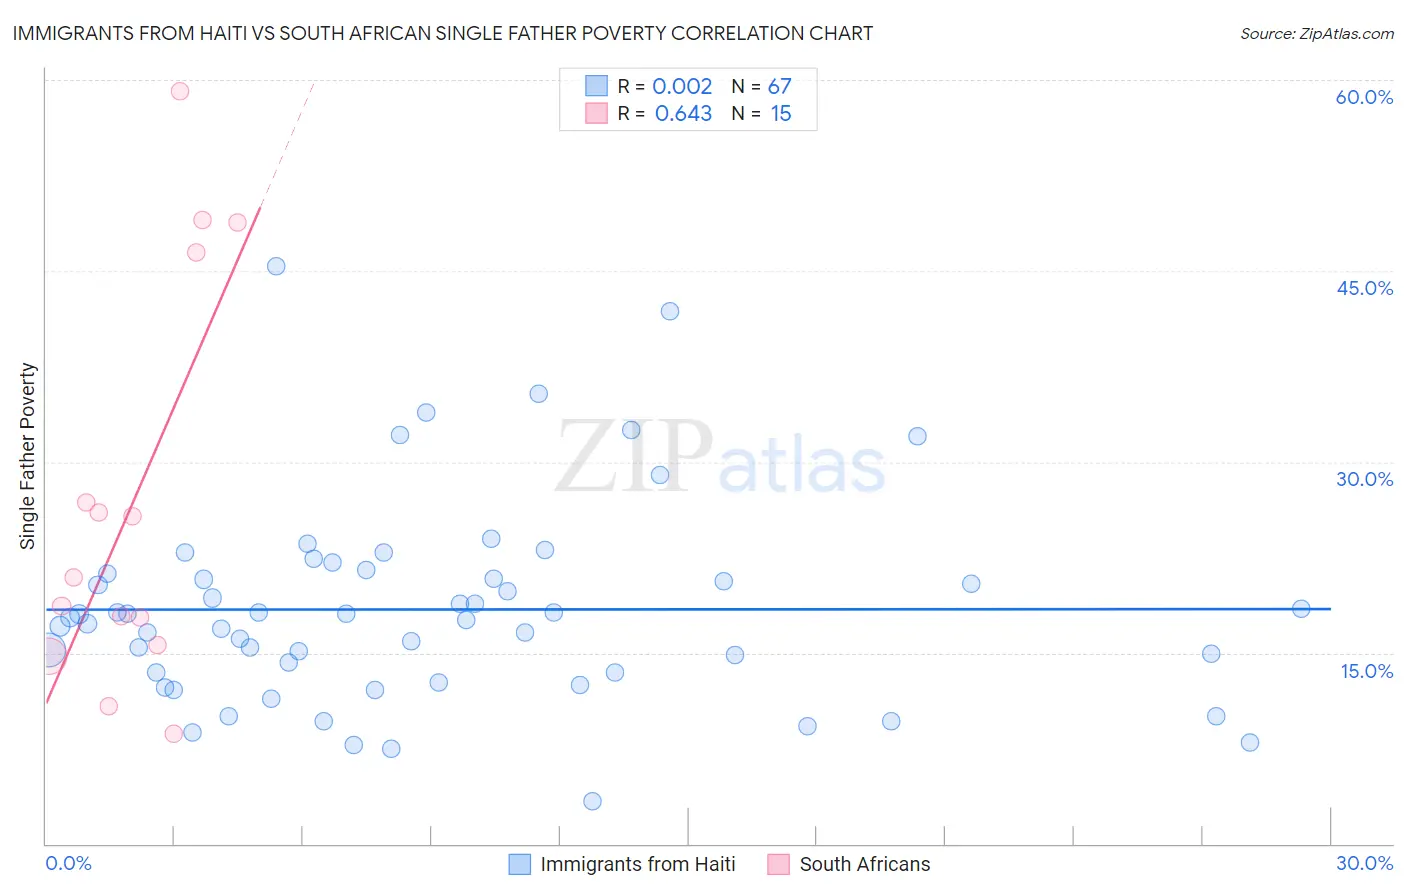 Immigrants from Haiti vs South African Single Father Poverty